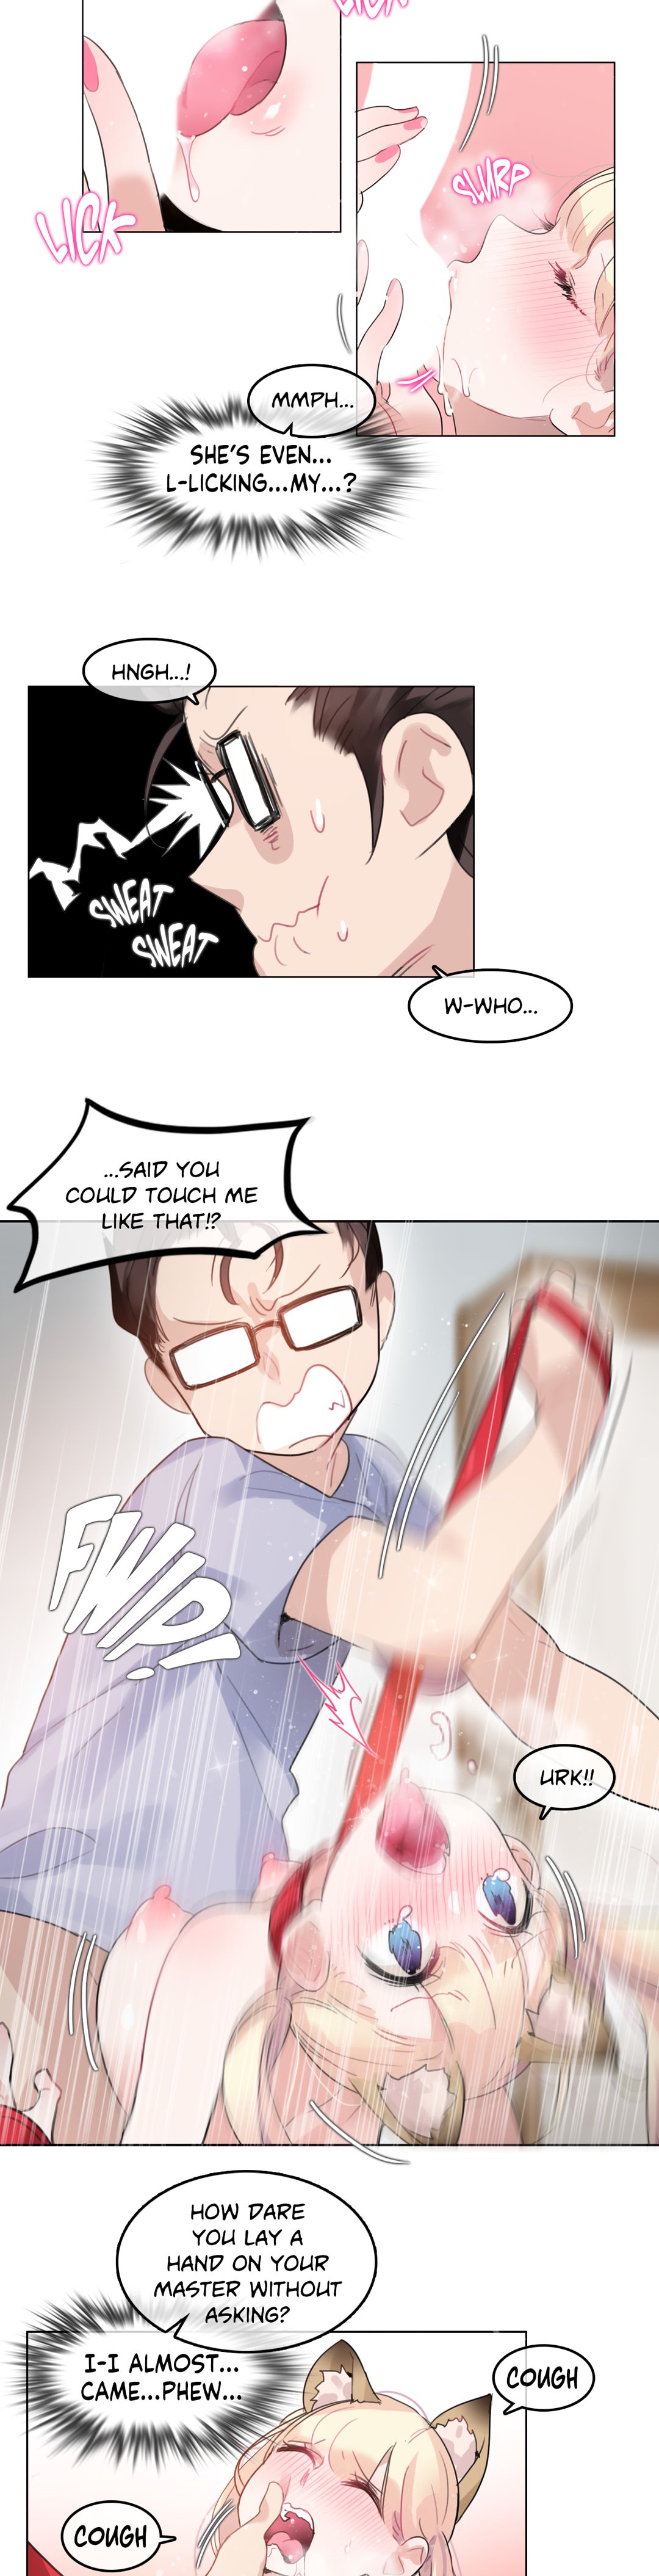 A Pervert's Daily Life - 40 page 3